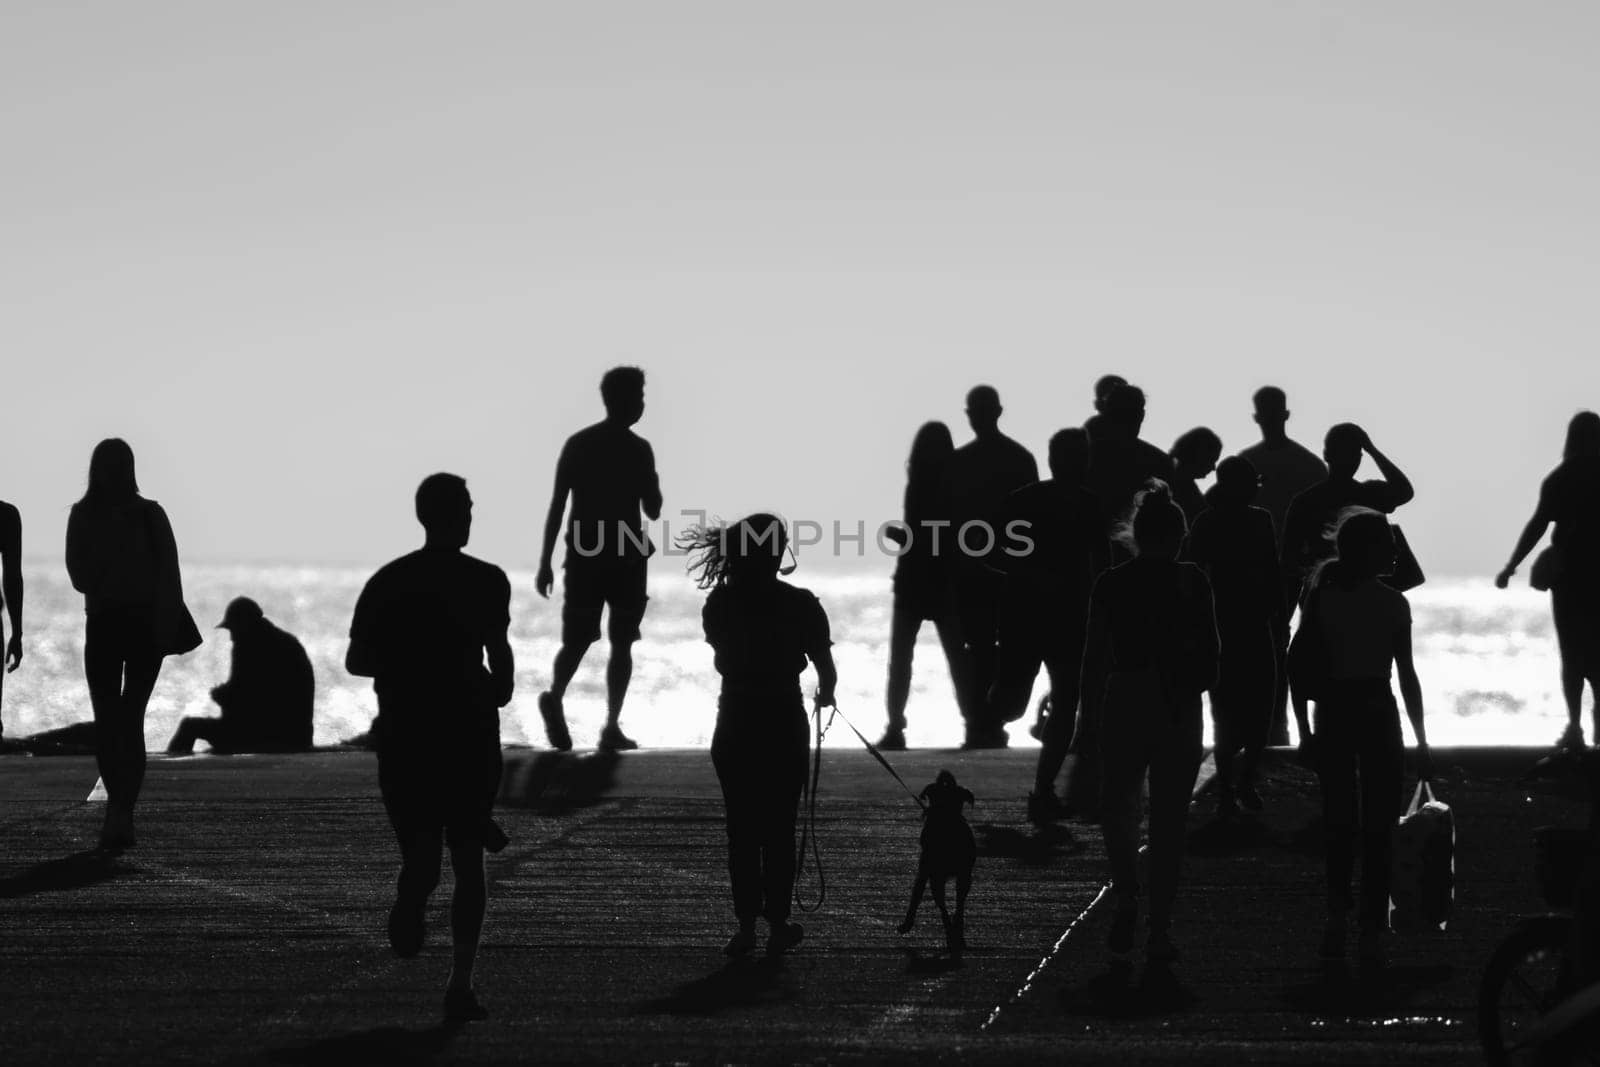 Monochrome shot of silhouettes of people walking on the hill by the sea. Mid shot